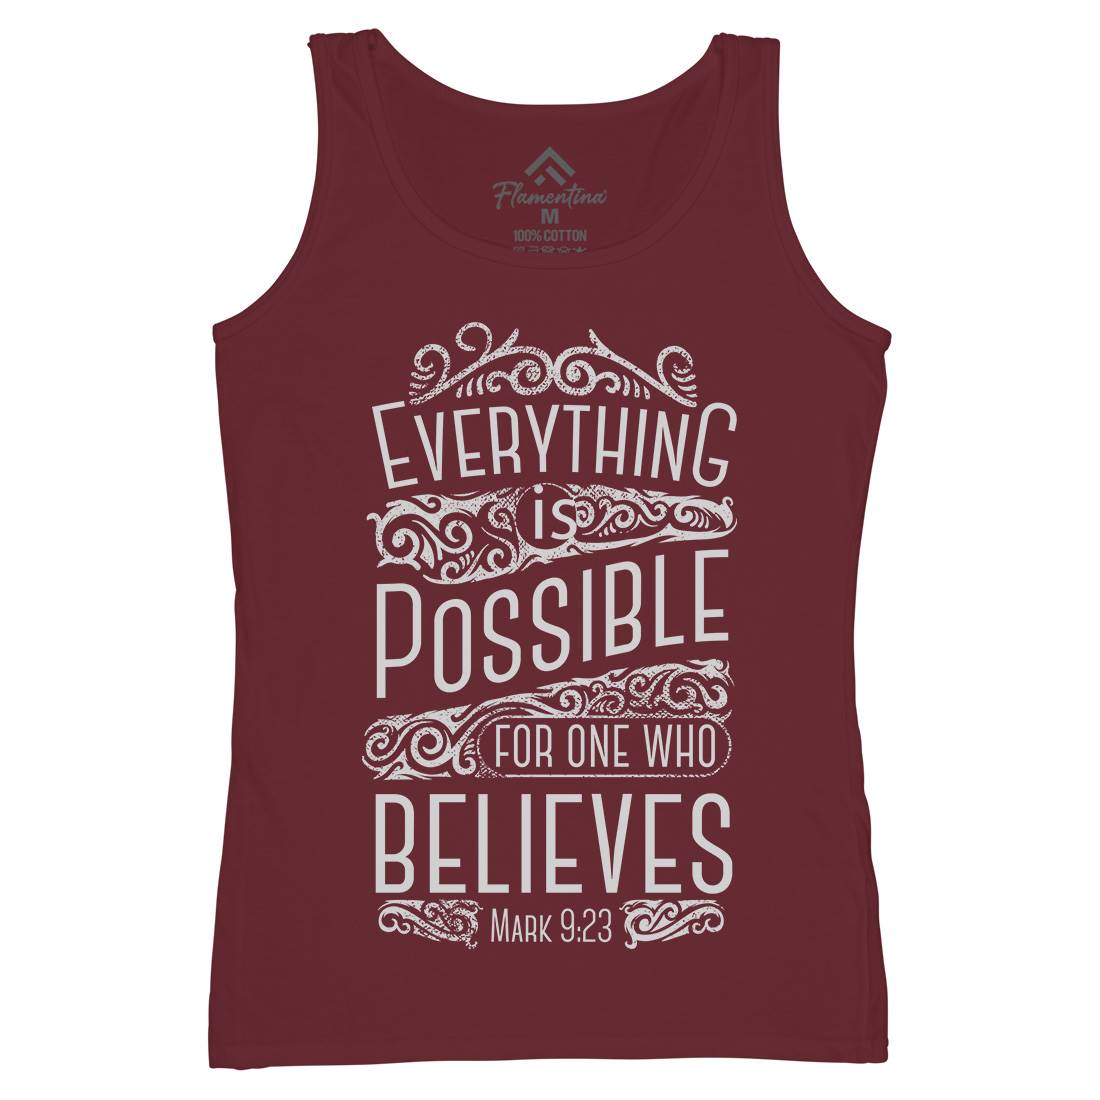 Everything Is Possible Womens Organic Tank Top Vest Religion C928